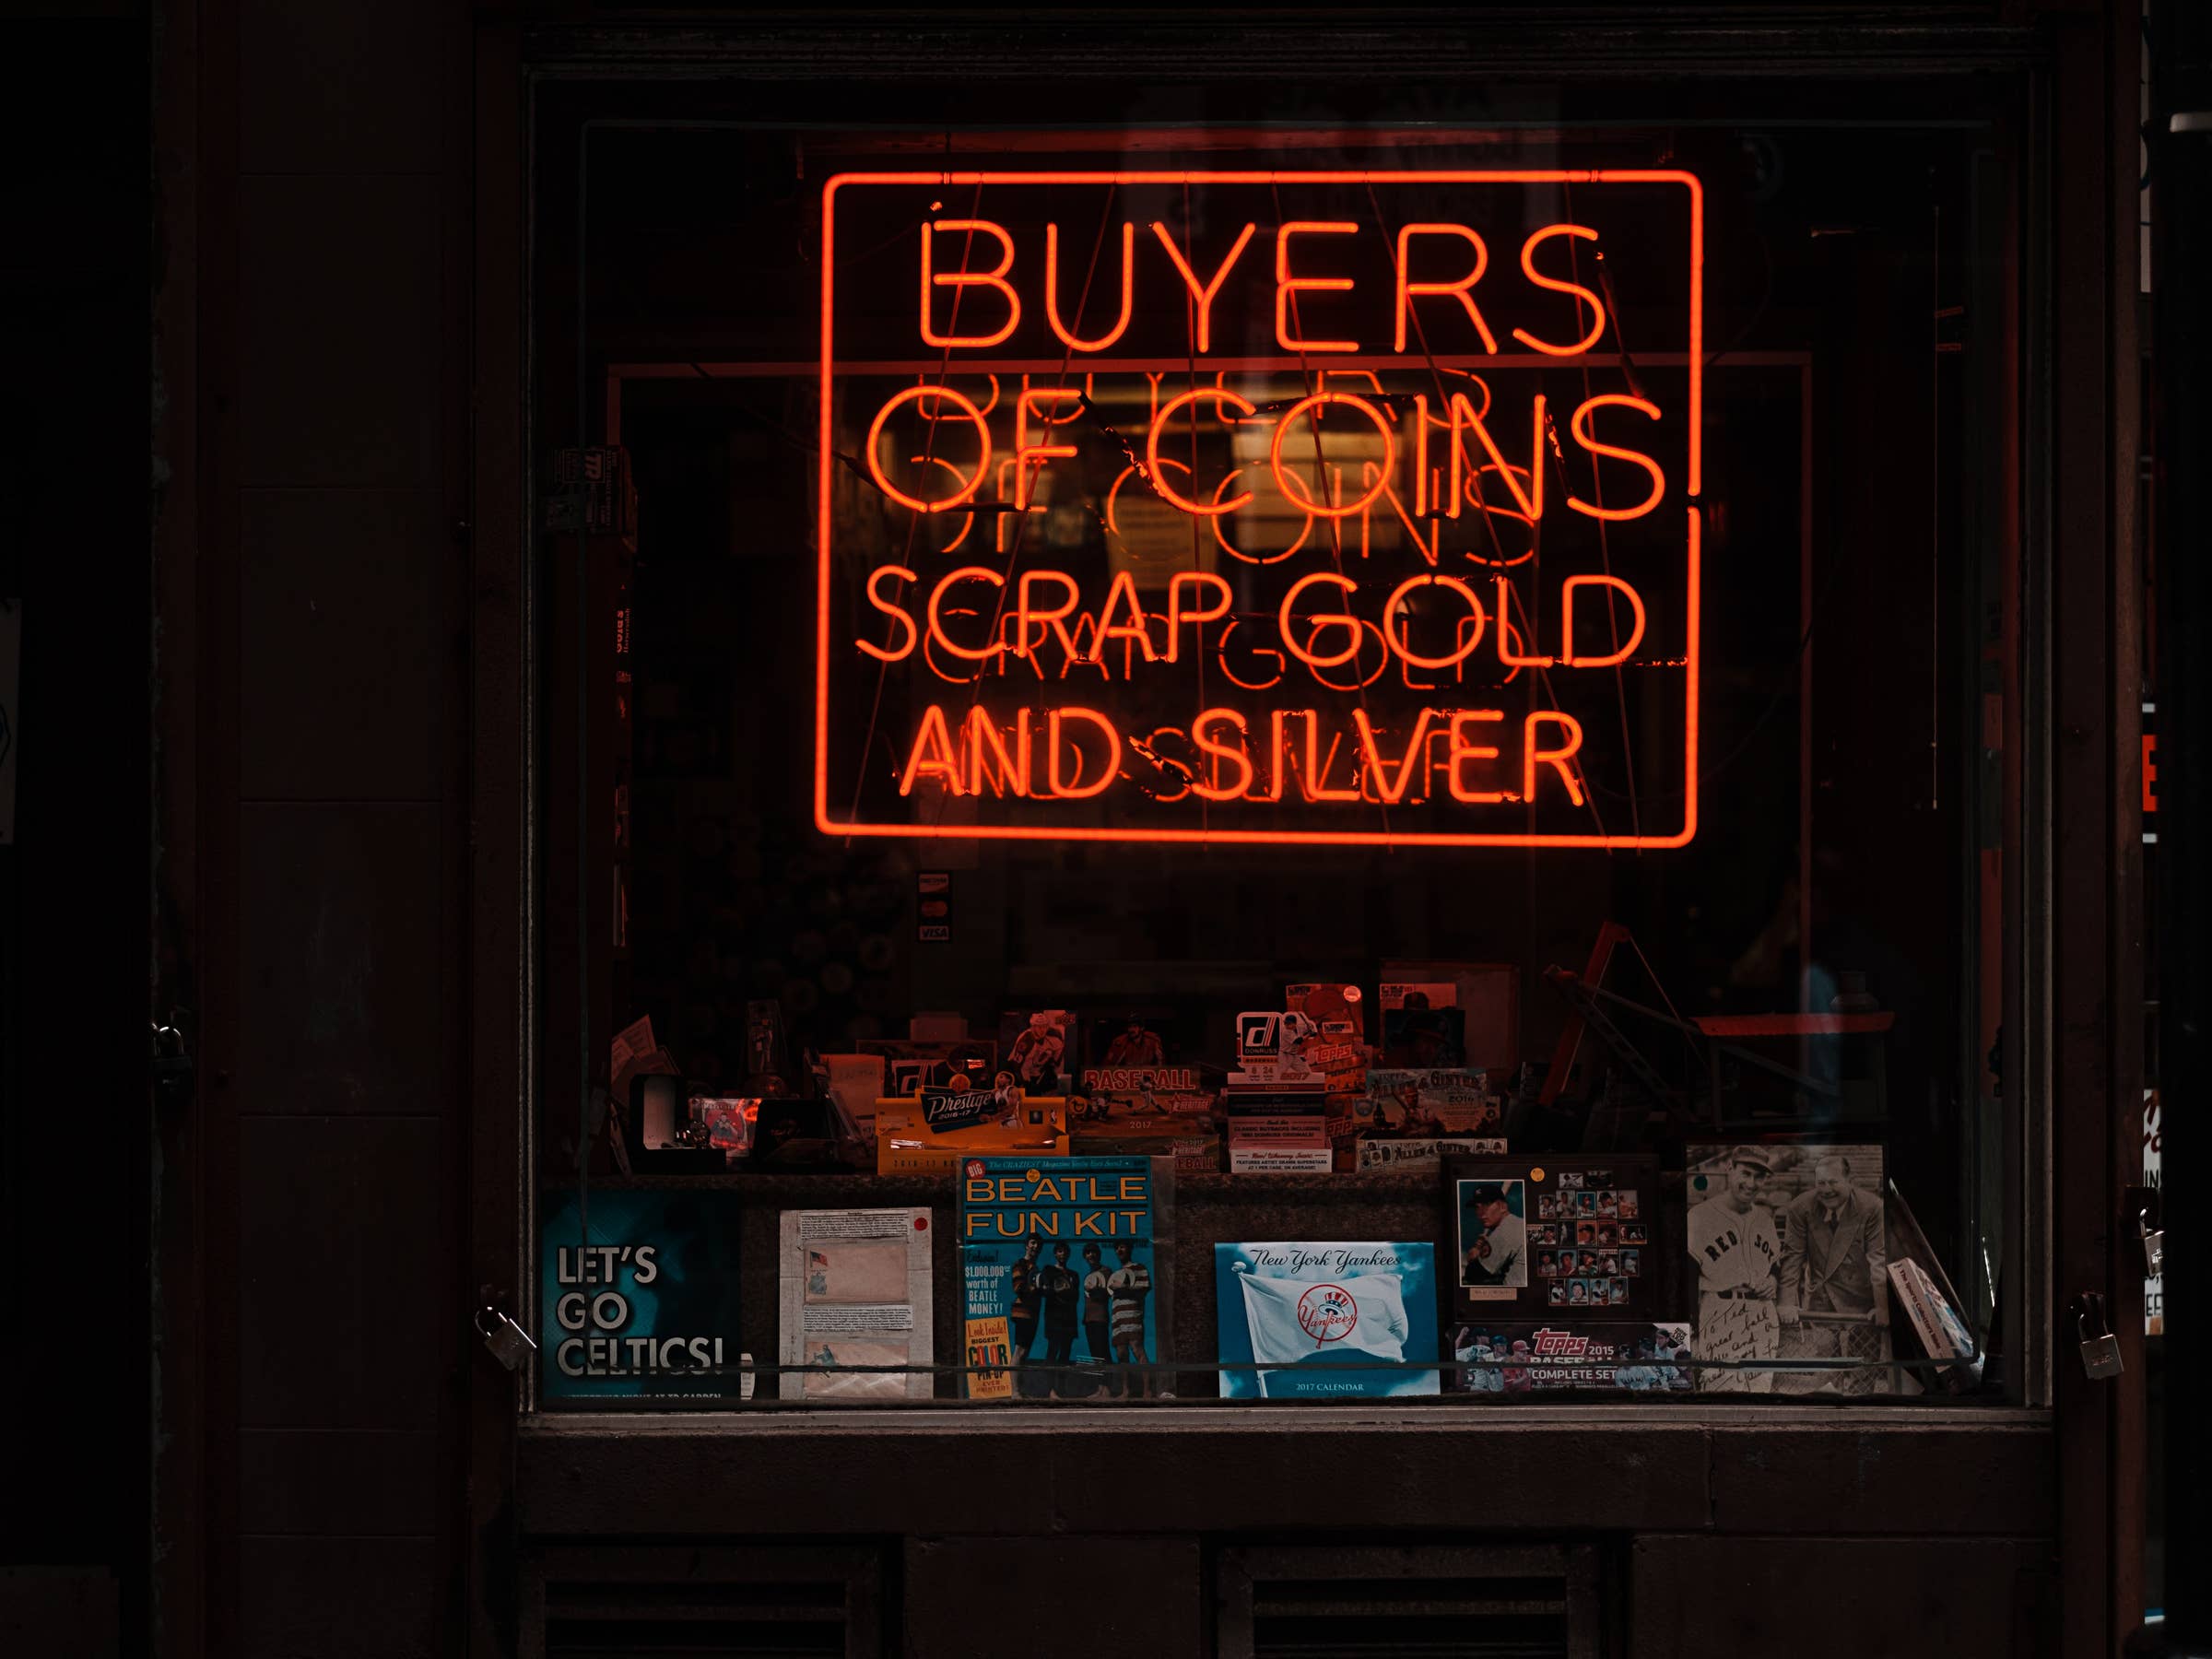 namesnack pawn shop business names 6000x4000 20200915